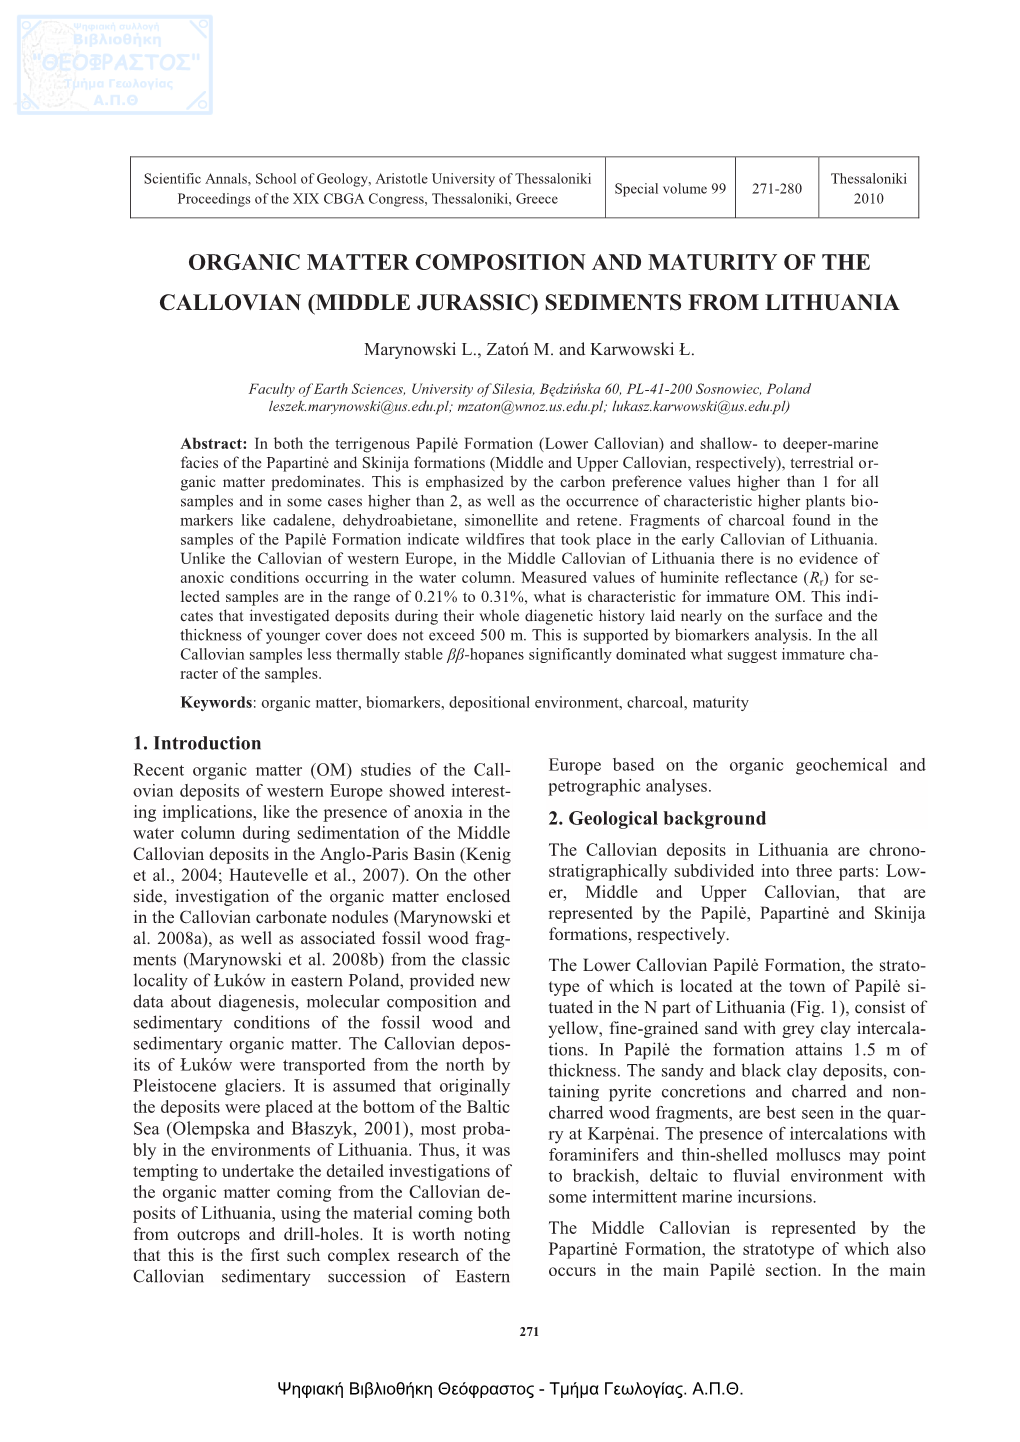 Organic Matter Composition and Maturity of the Callovian